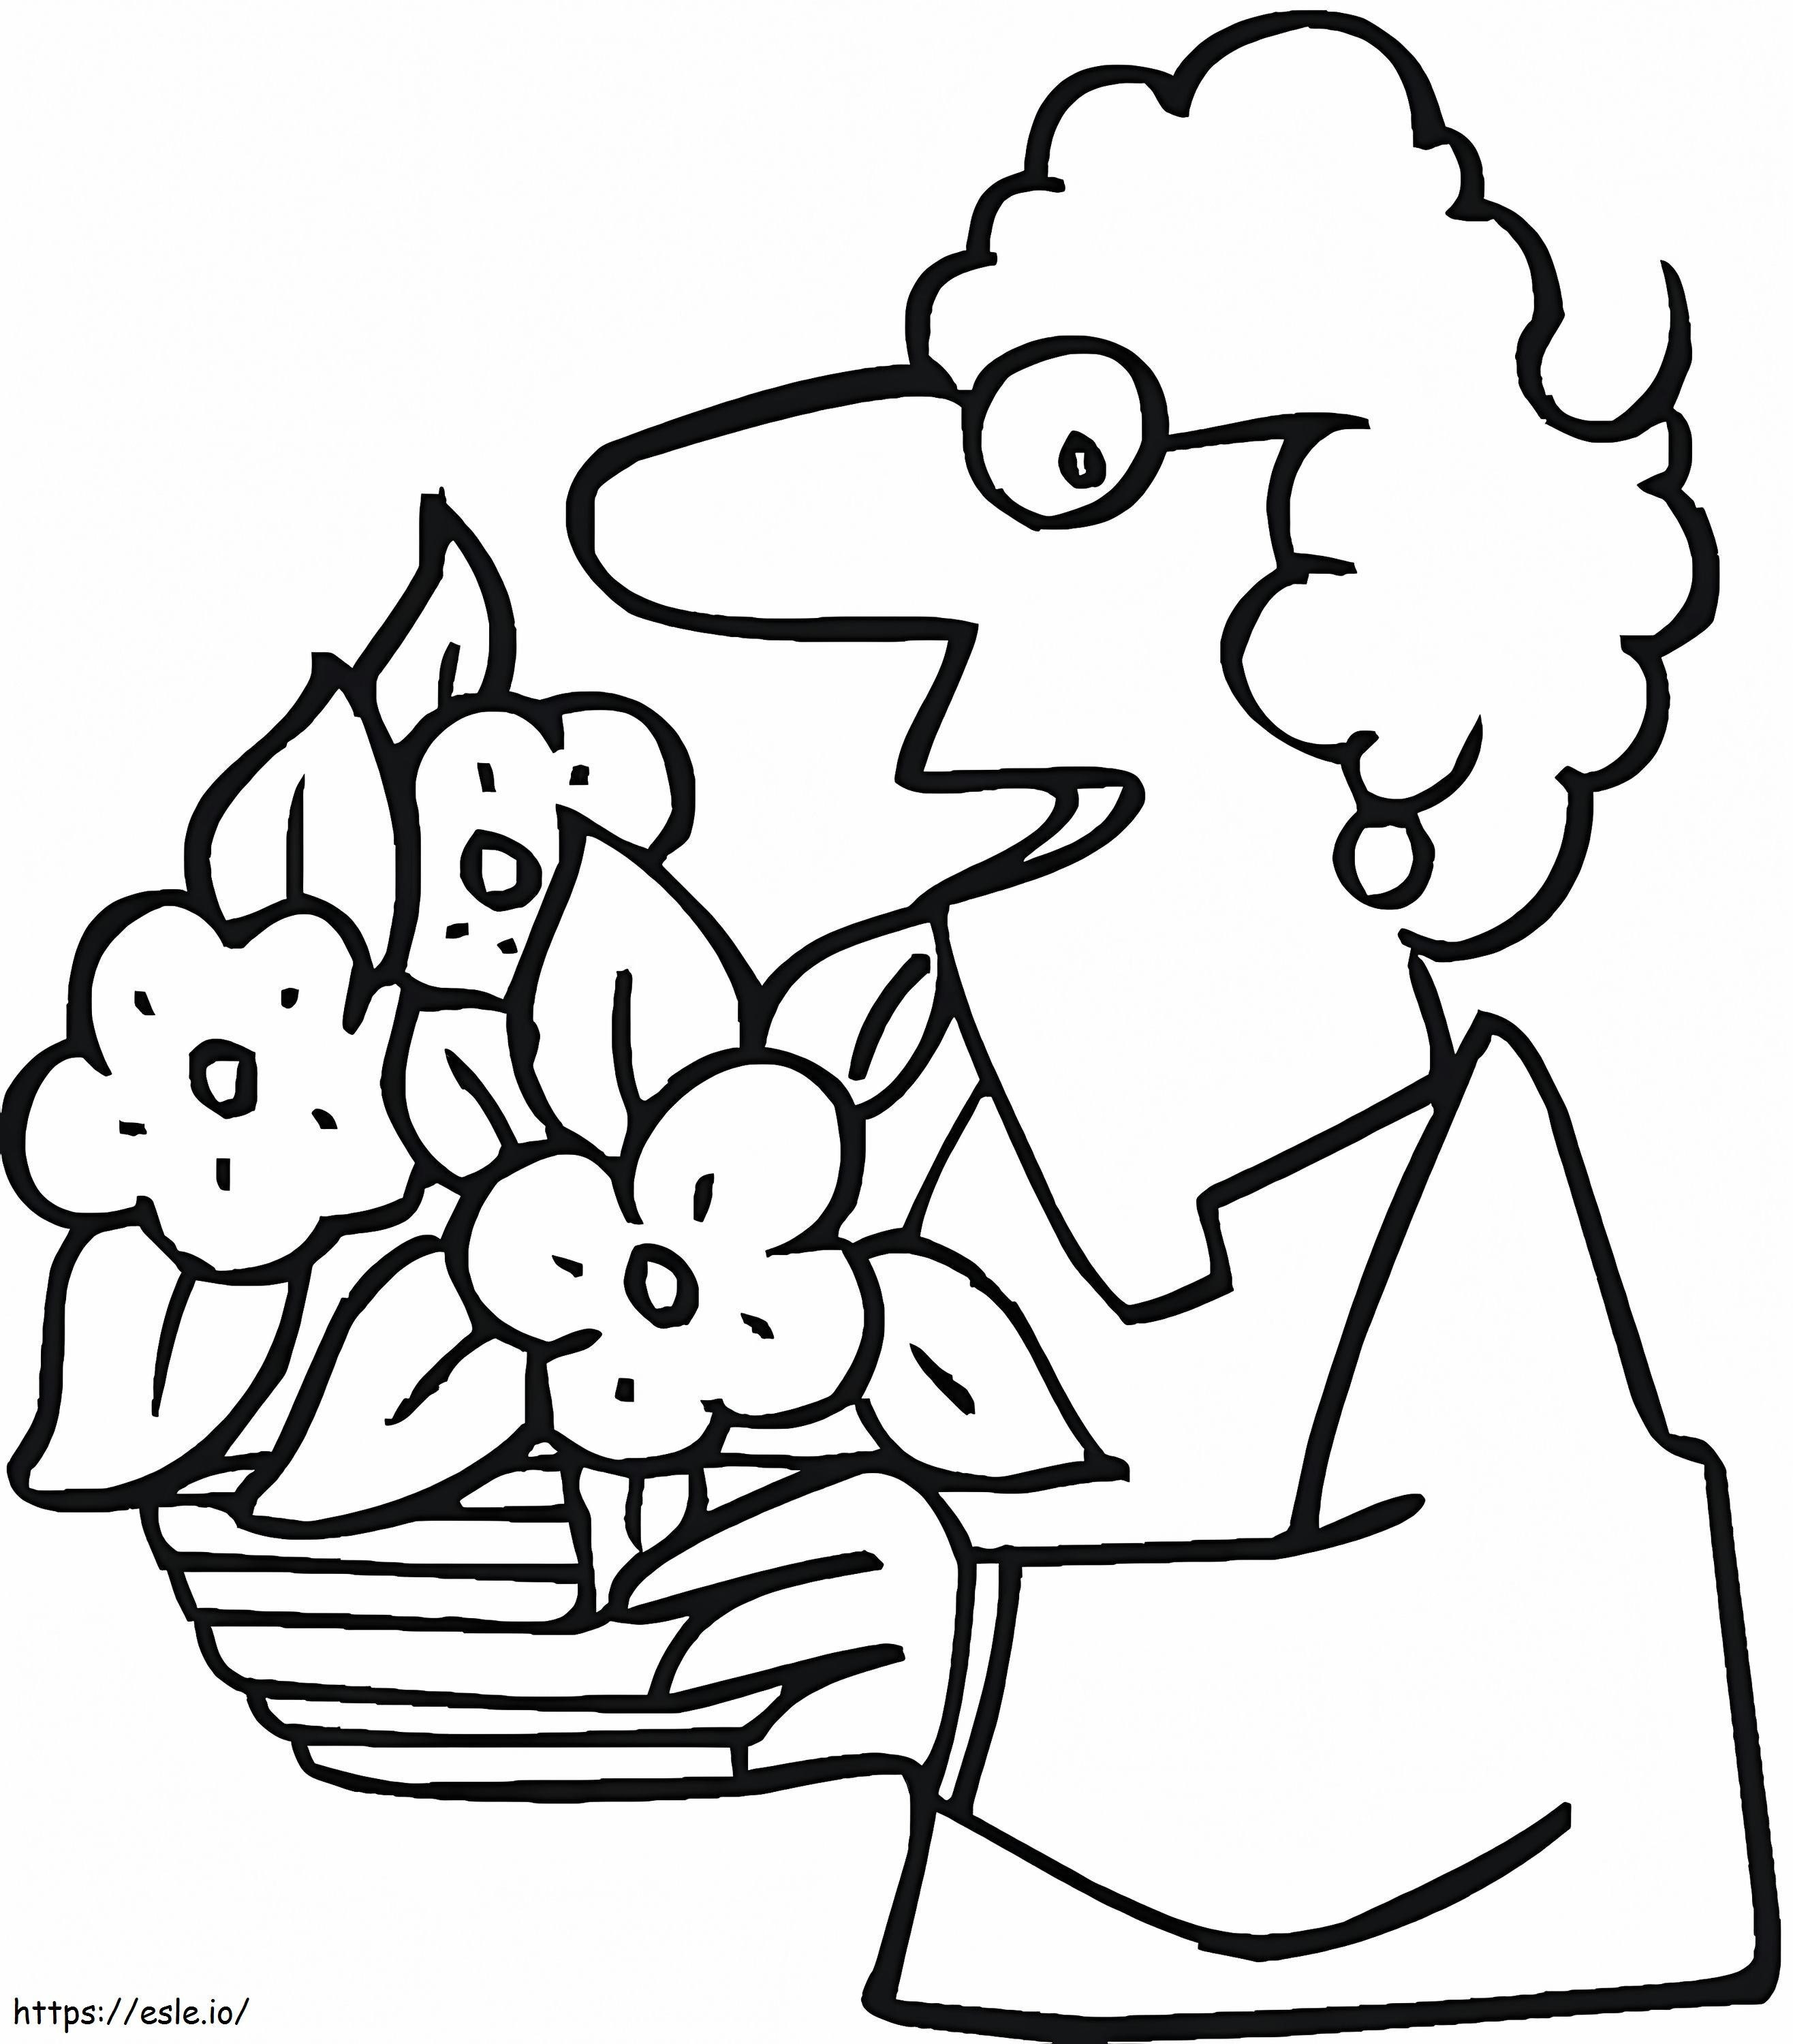 Grandmother With Flower Pot coloring page